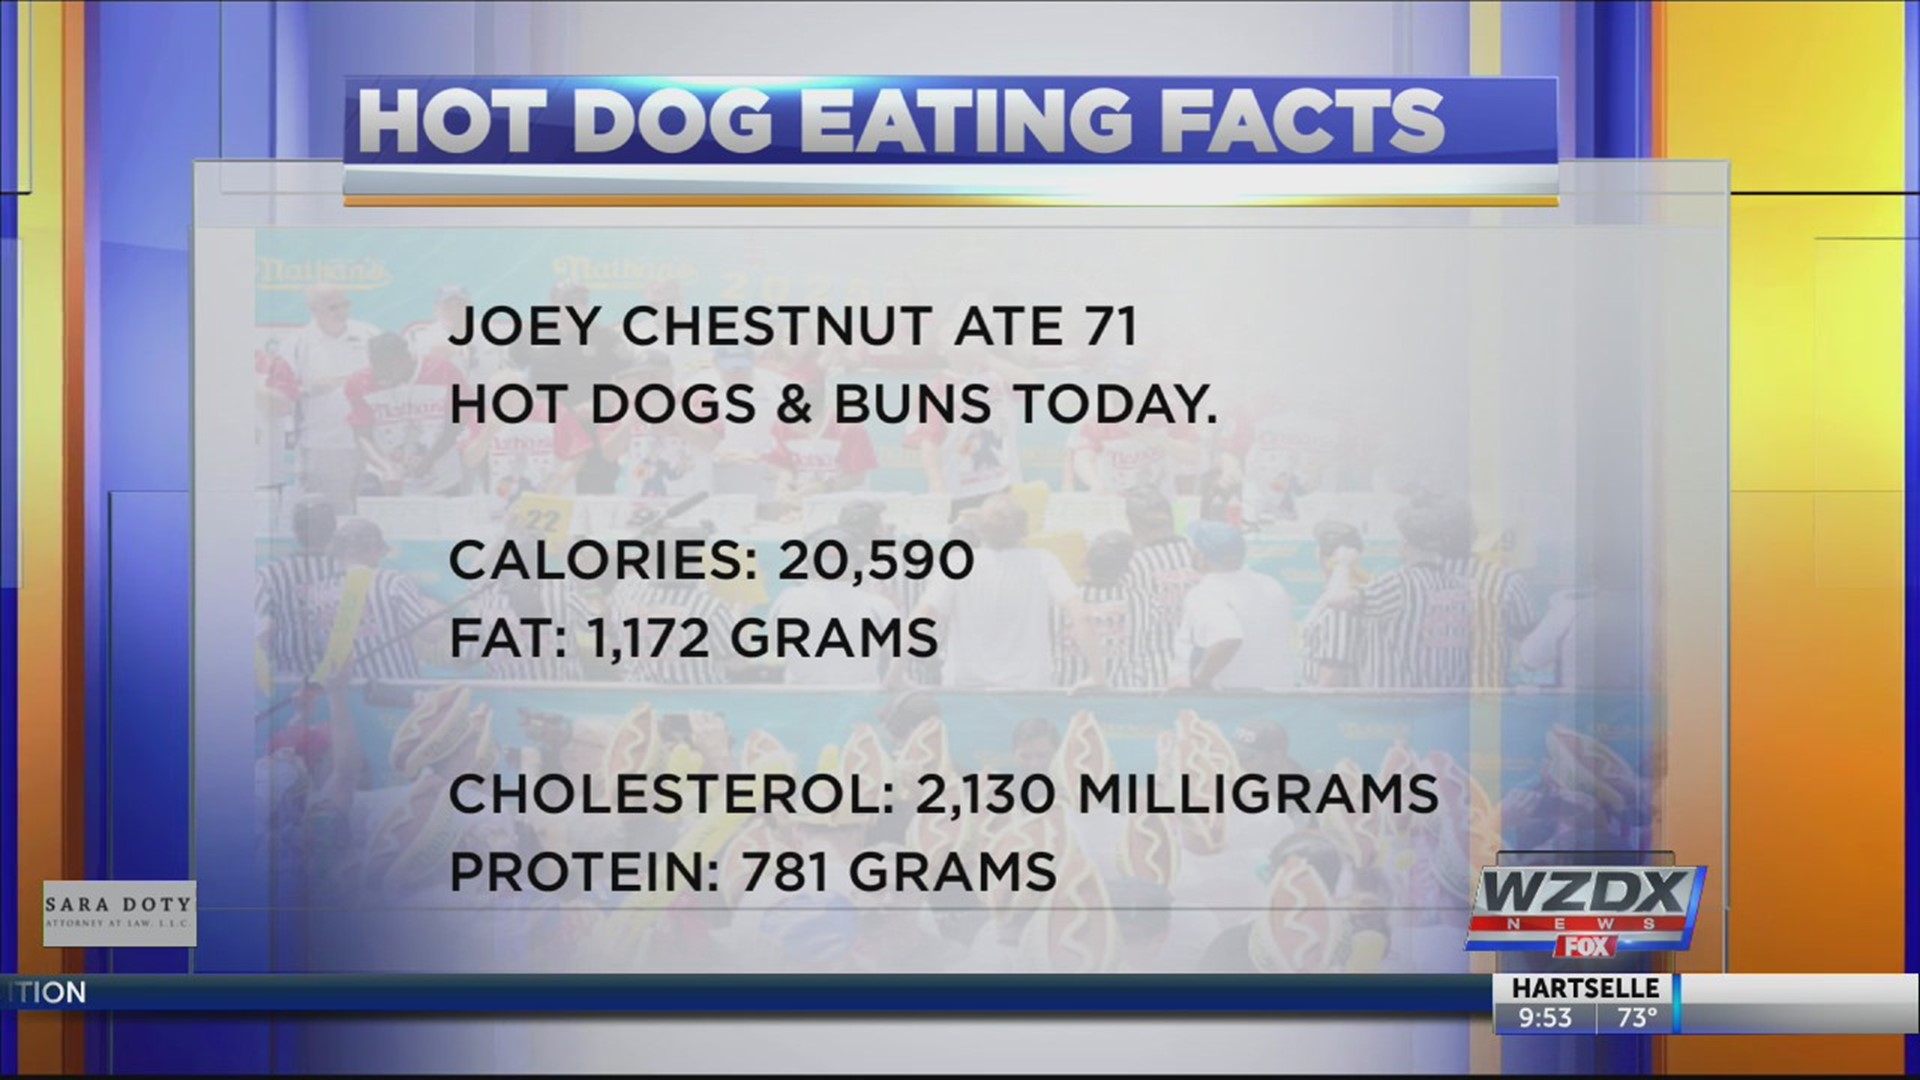 Joey "Jaws'' Chestnut ate 71 Hot Dogs to and buns to win his 12th title at the annual Nathan's Famous July Fourth hot dog eating contest Thursday, just a few hot dogs shy of breaking the record he set last year of 74